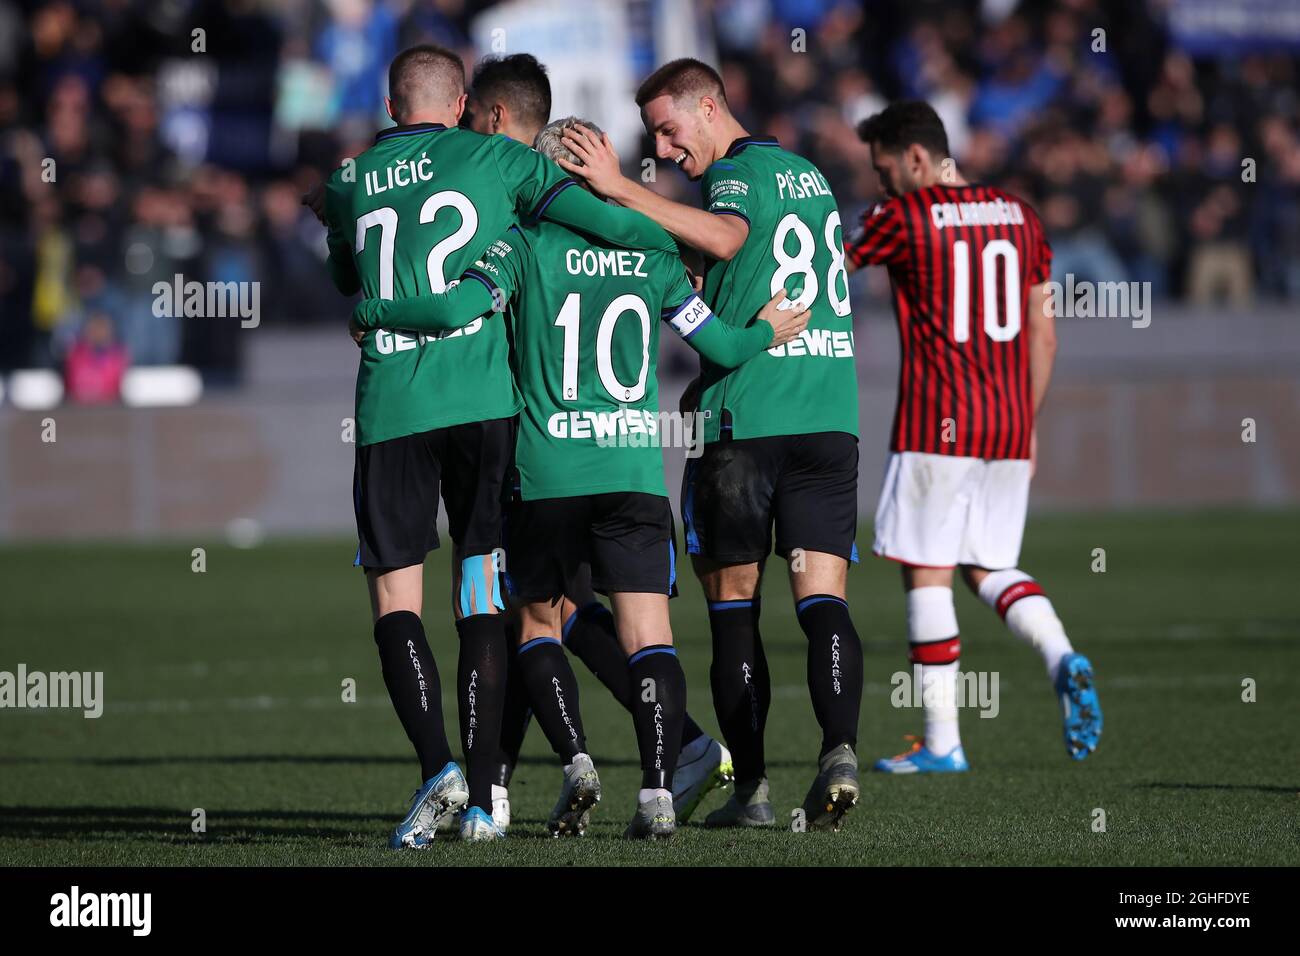 Josip Ilicic of Atalanta celebrates with team mates Alejandro Gomez and Mario Pasalic after scoring his second goal to give the side a 4-0 lead during the Serie A match at Gewiss Stadium, Bergamo. Picture date: 22nd December 2019. Picture credit should read: Jonathan Moscrop/Sportimage via PA Images Stock Photo